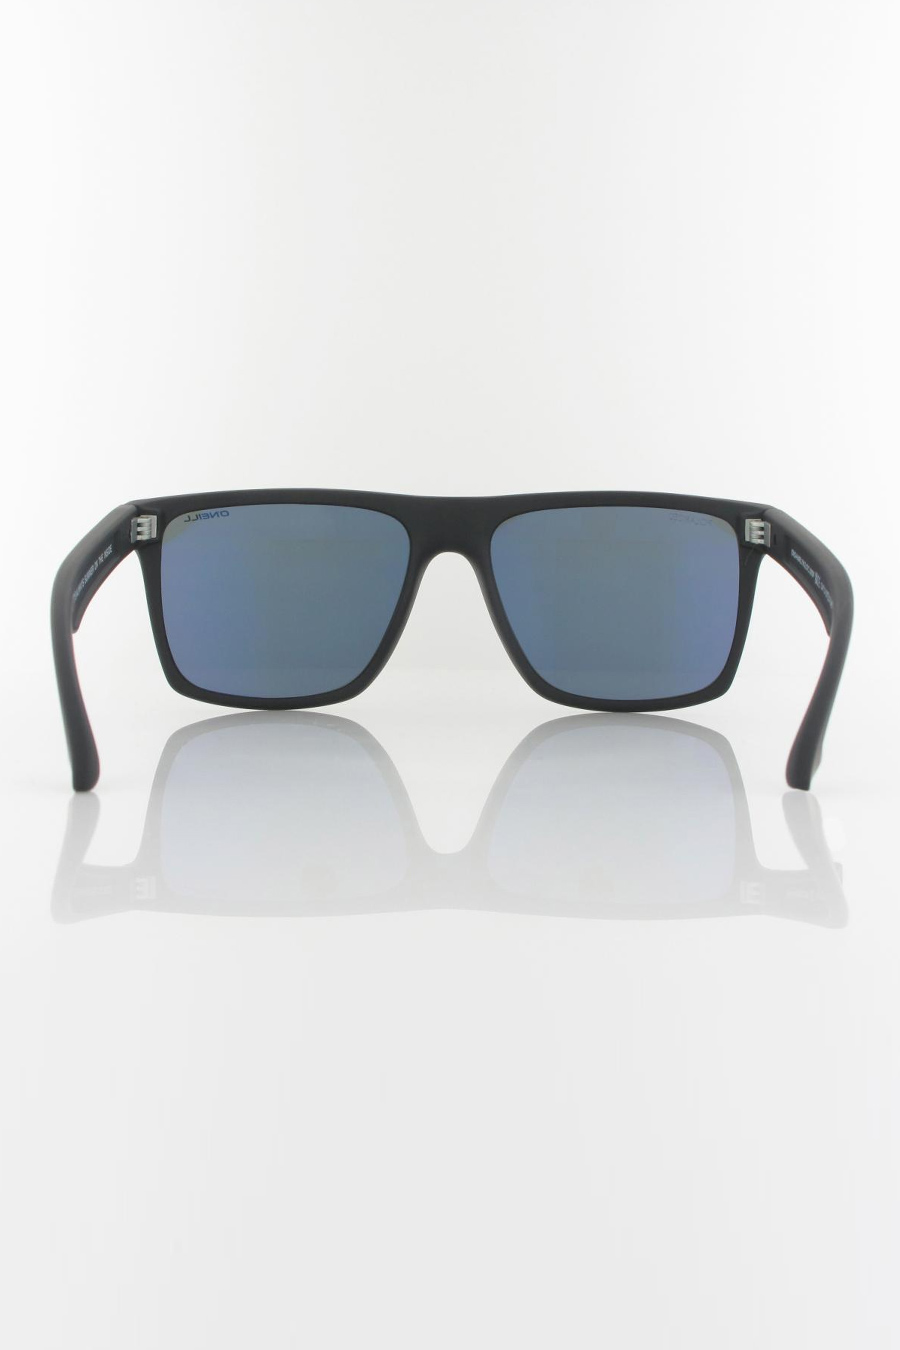 Sunglasses ONEILL ONS-HARLYN20-193P